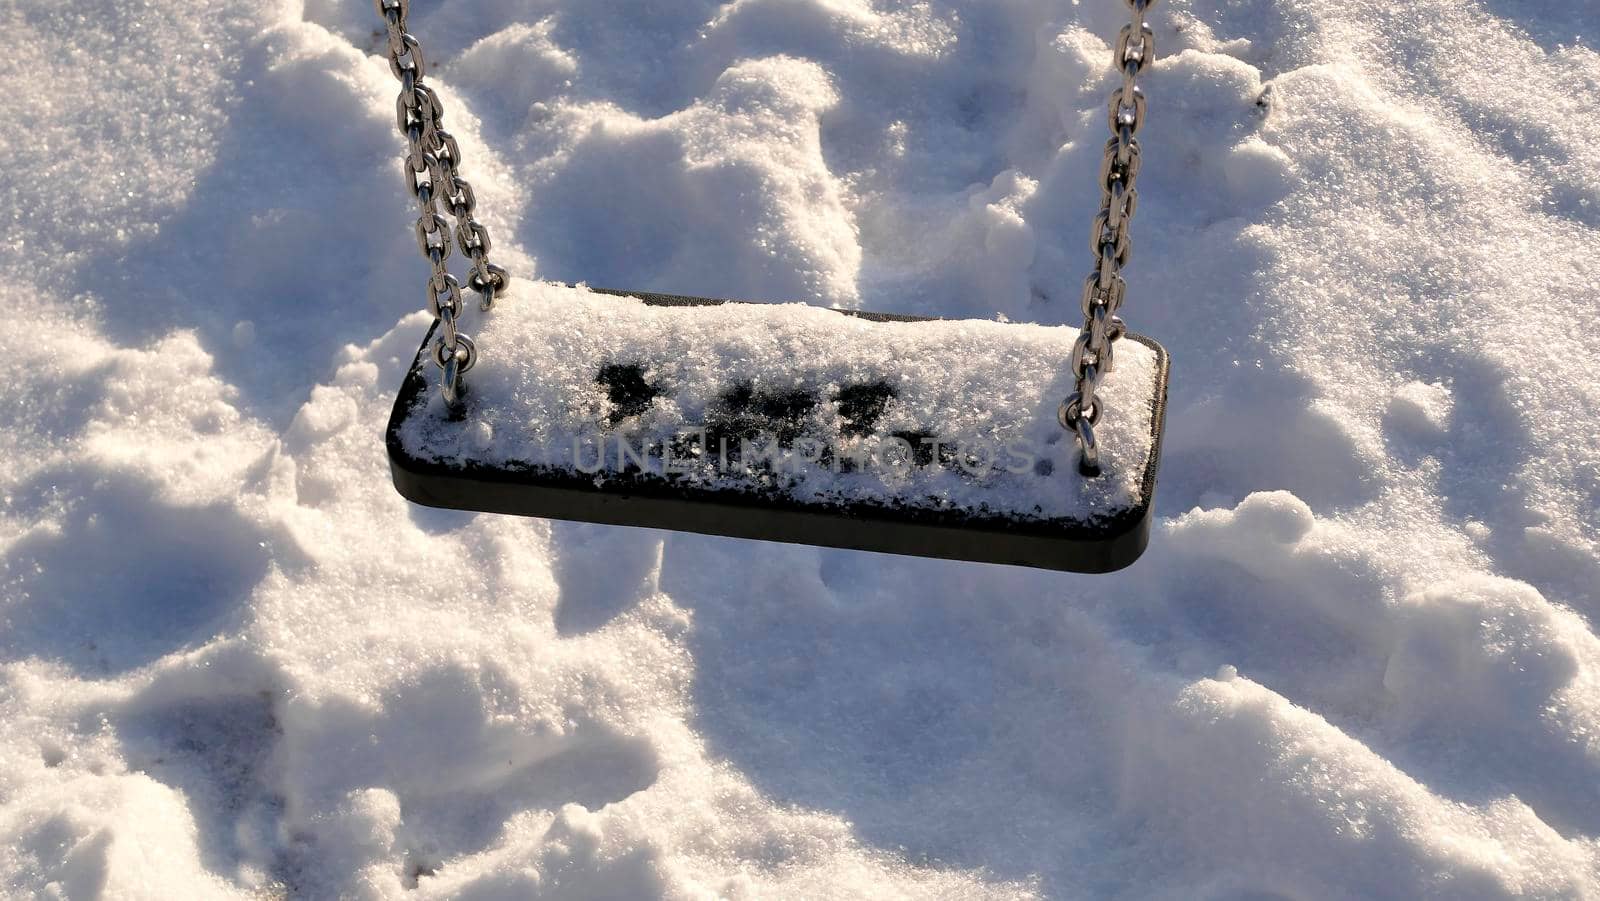 swing with snow cover in wintertime by Jochen